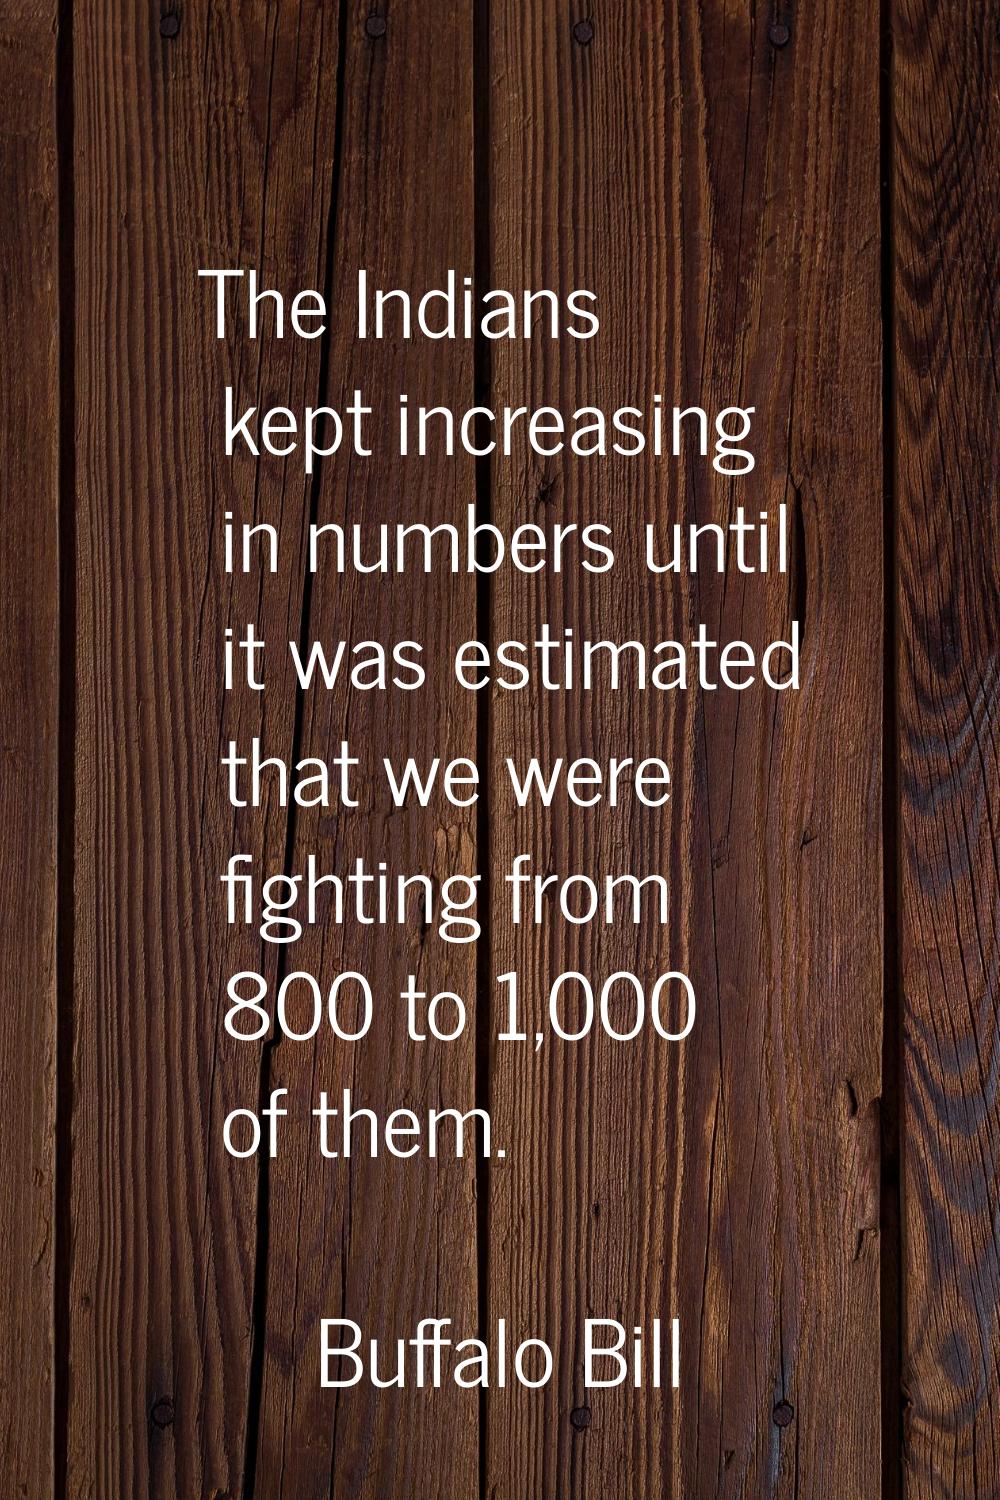 The Indians kept increasing in numbers until it was estimated that we were fighting from 800 to 1,0